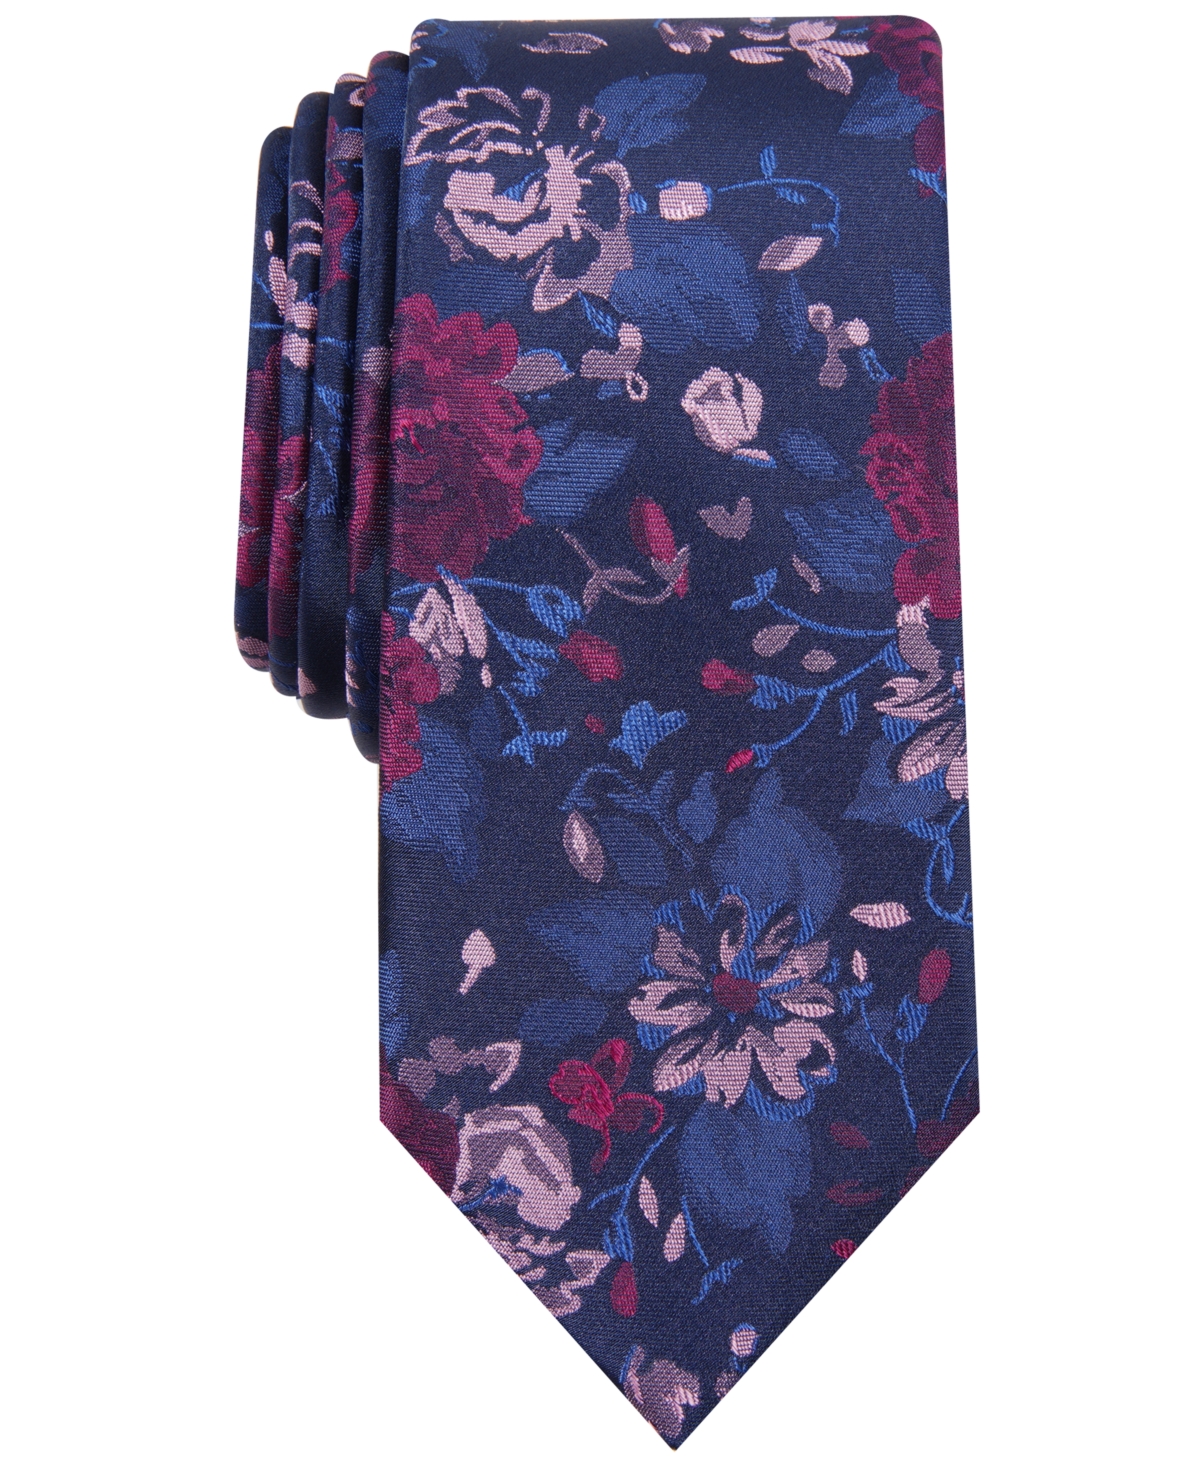 Men's Hilton Floral Slim Tie, Created for Macy's - Berry